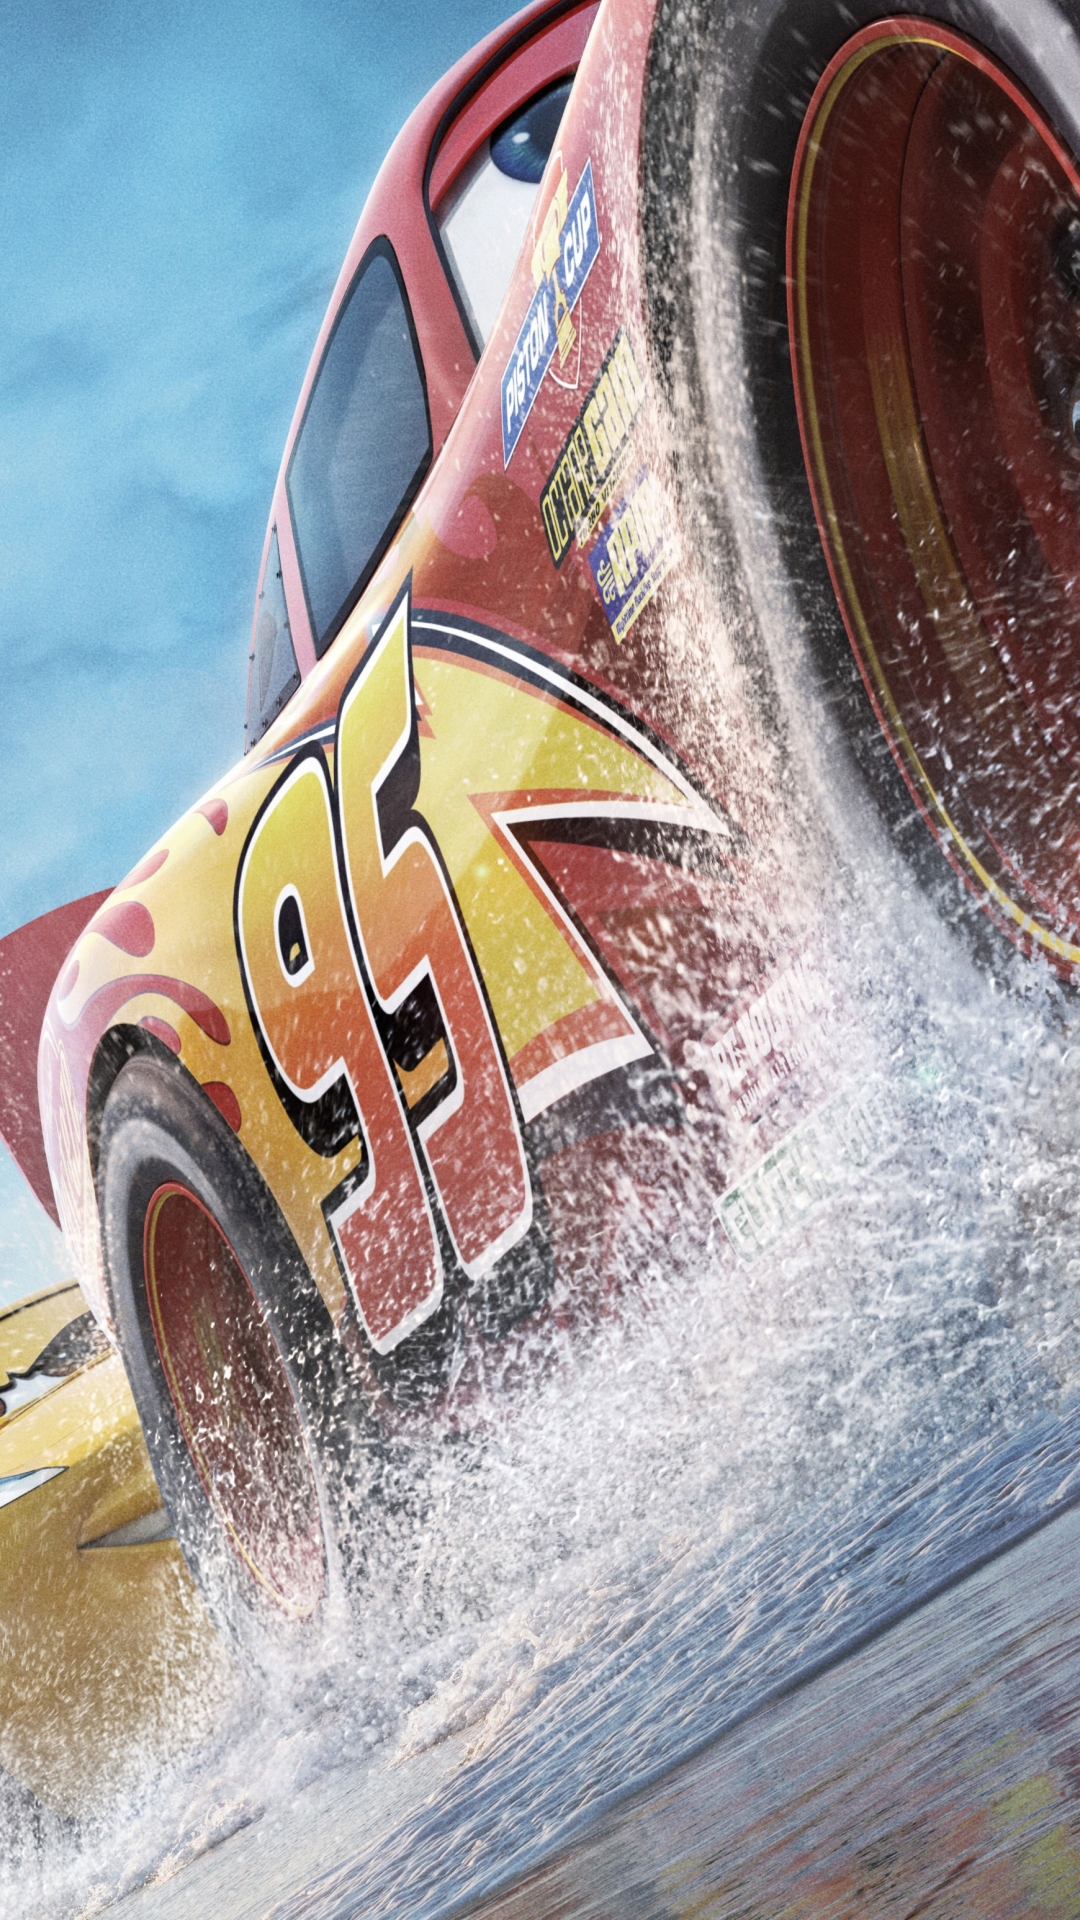 I think The King should finish his last race.” - Lightning McQueen, 'Cars'  4K wallpaper download